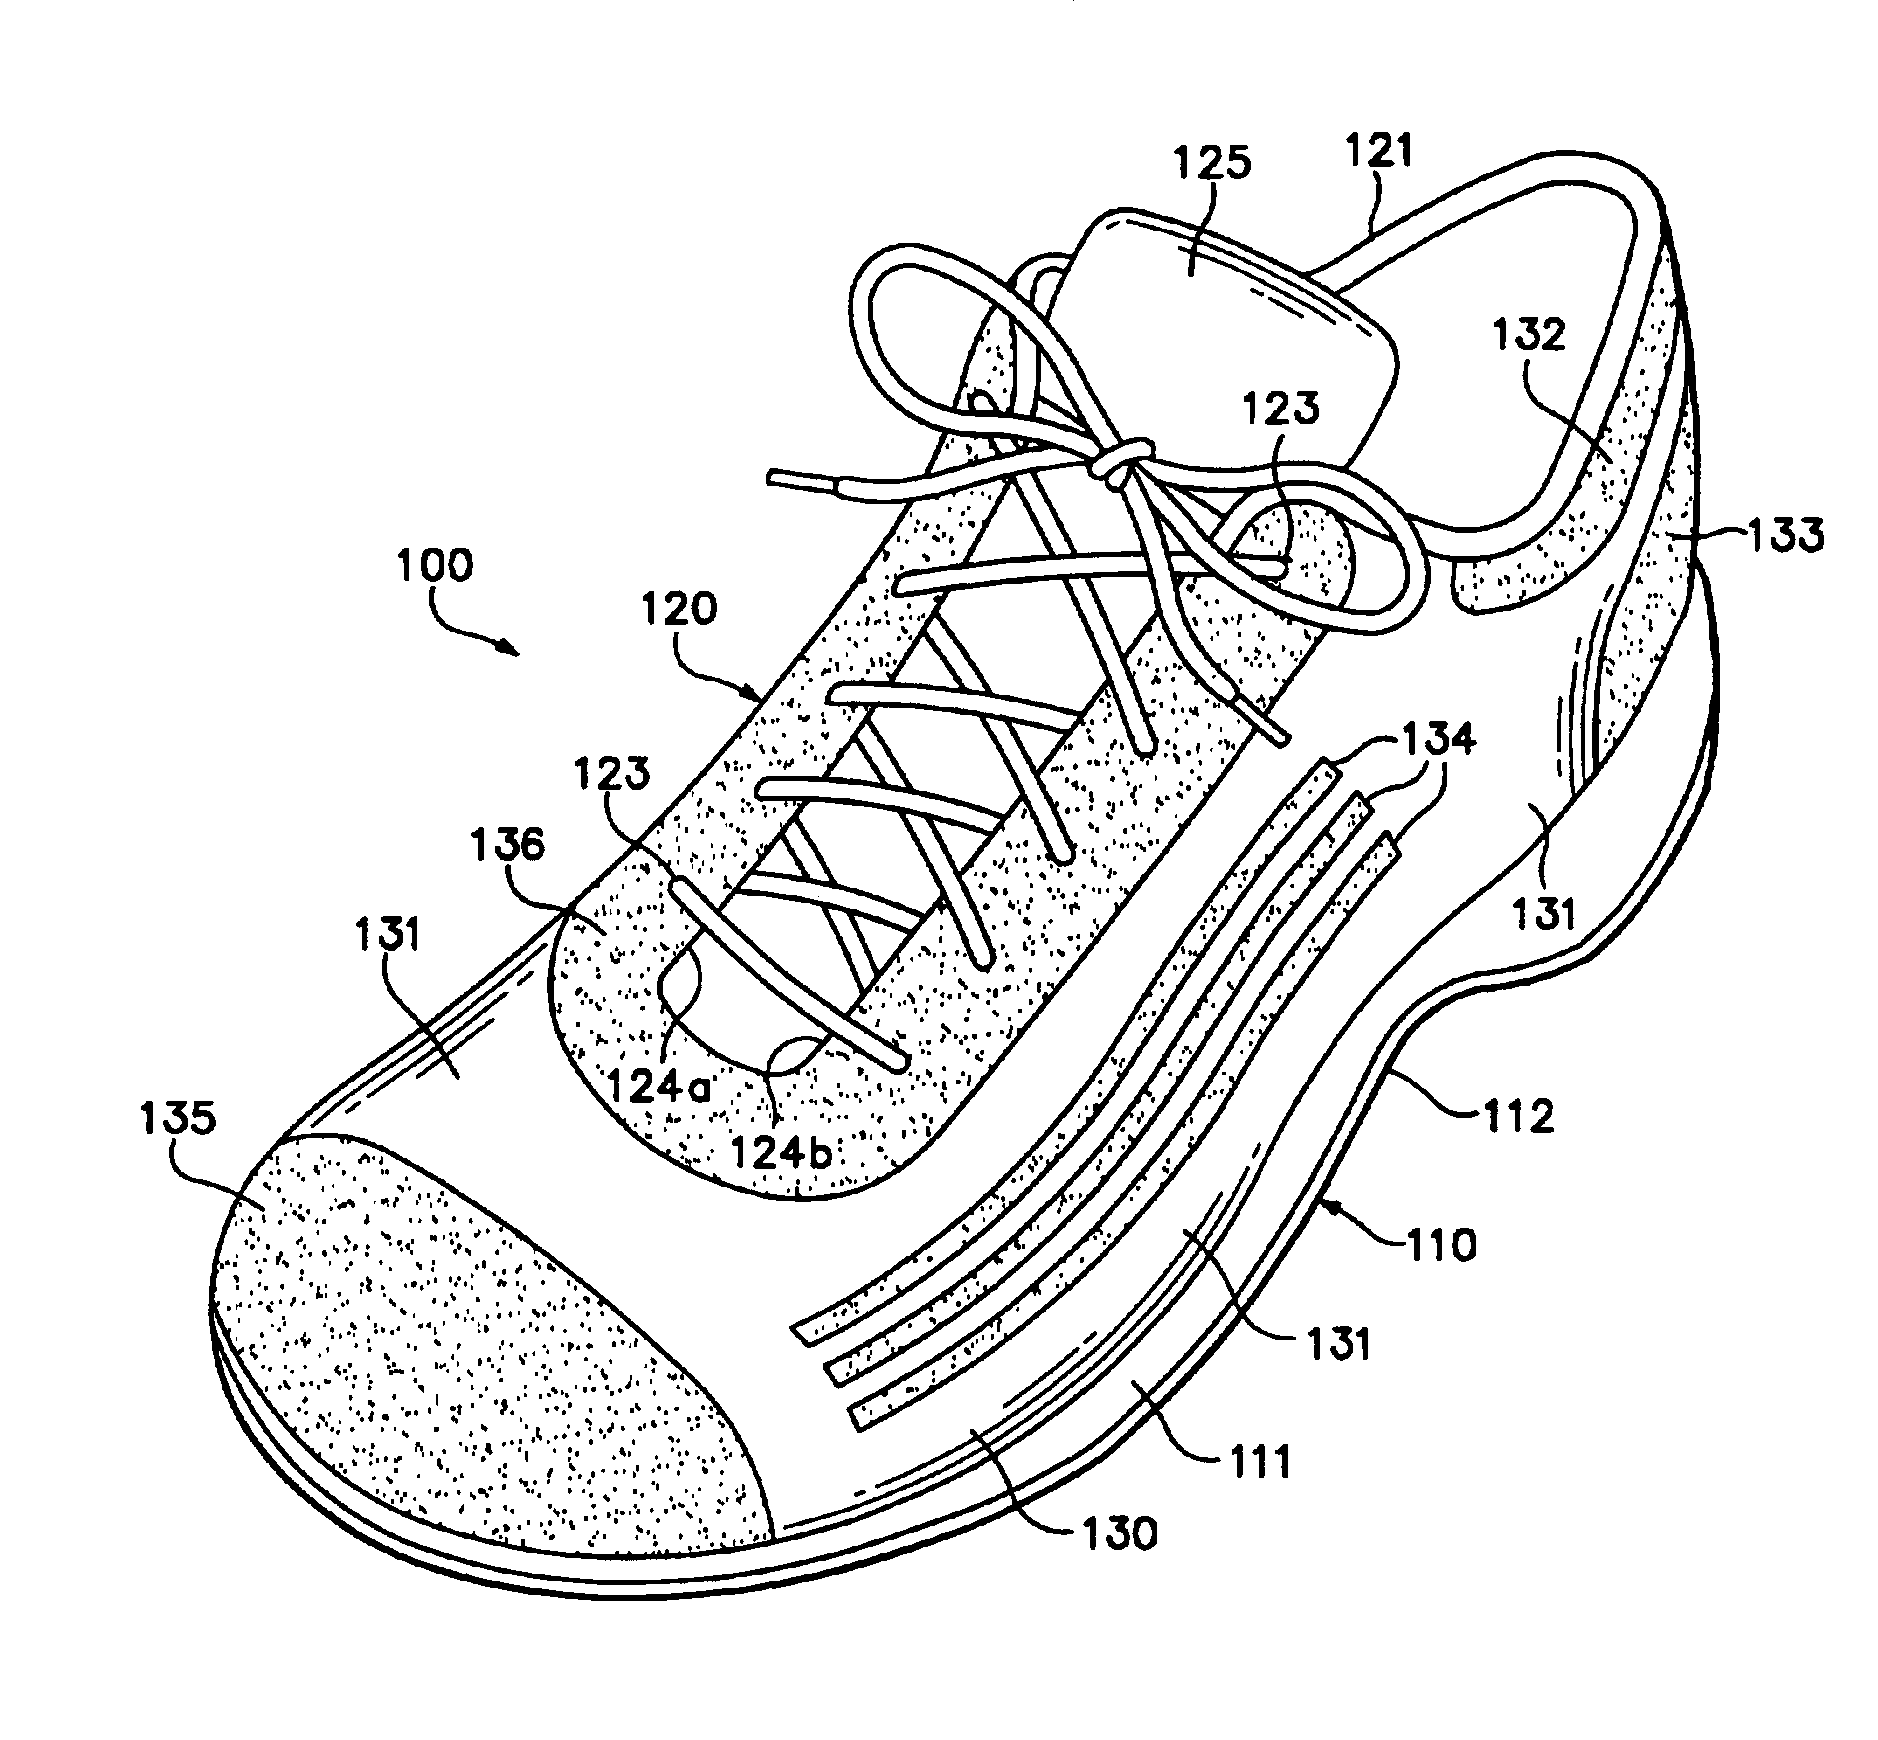 Footwear incorporating a textile with fusible filaments and fibers